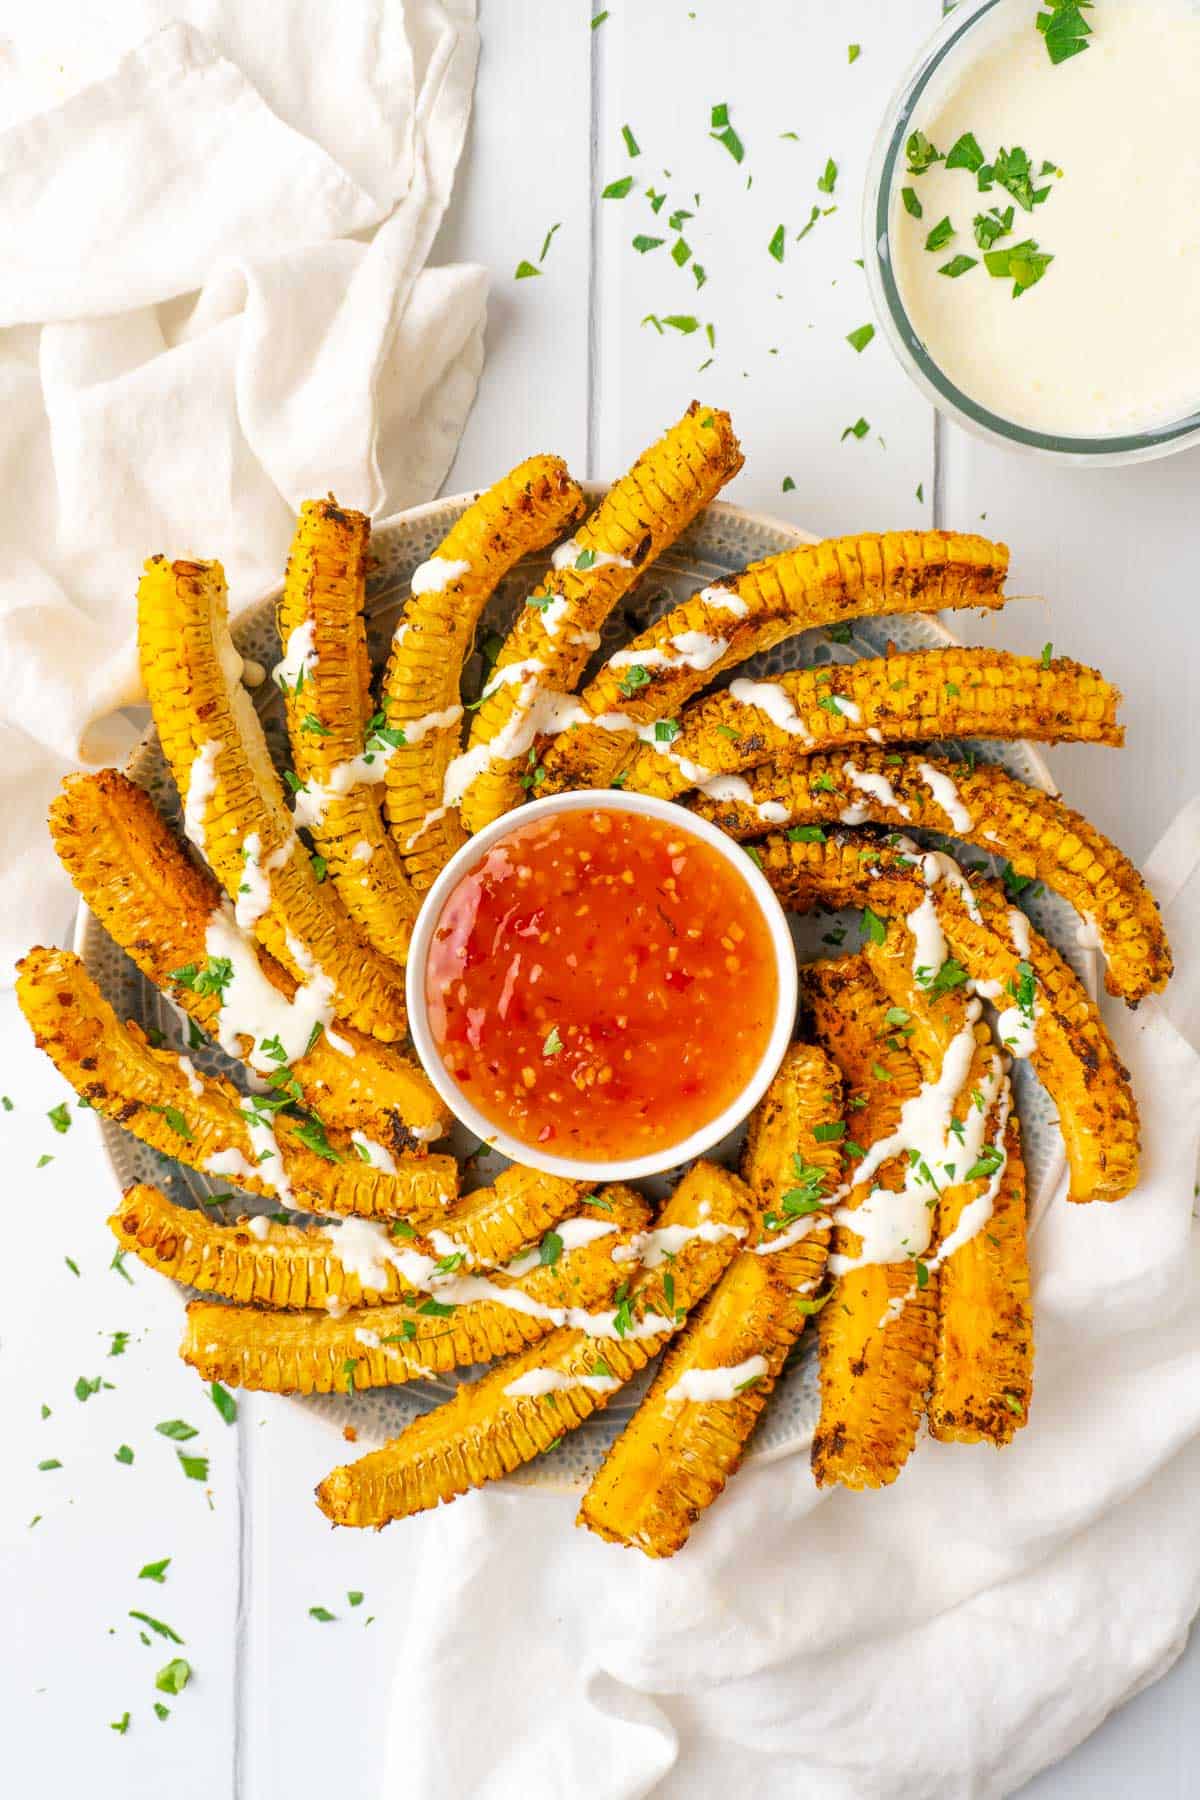 cooked corn ribs arranged on a platter in a circle garnished with a creamy sauce and fresh herbs